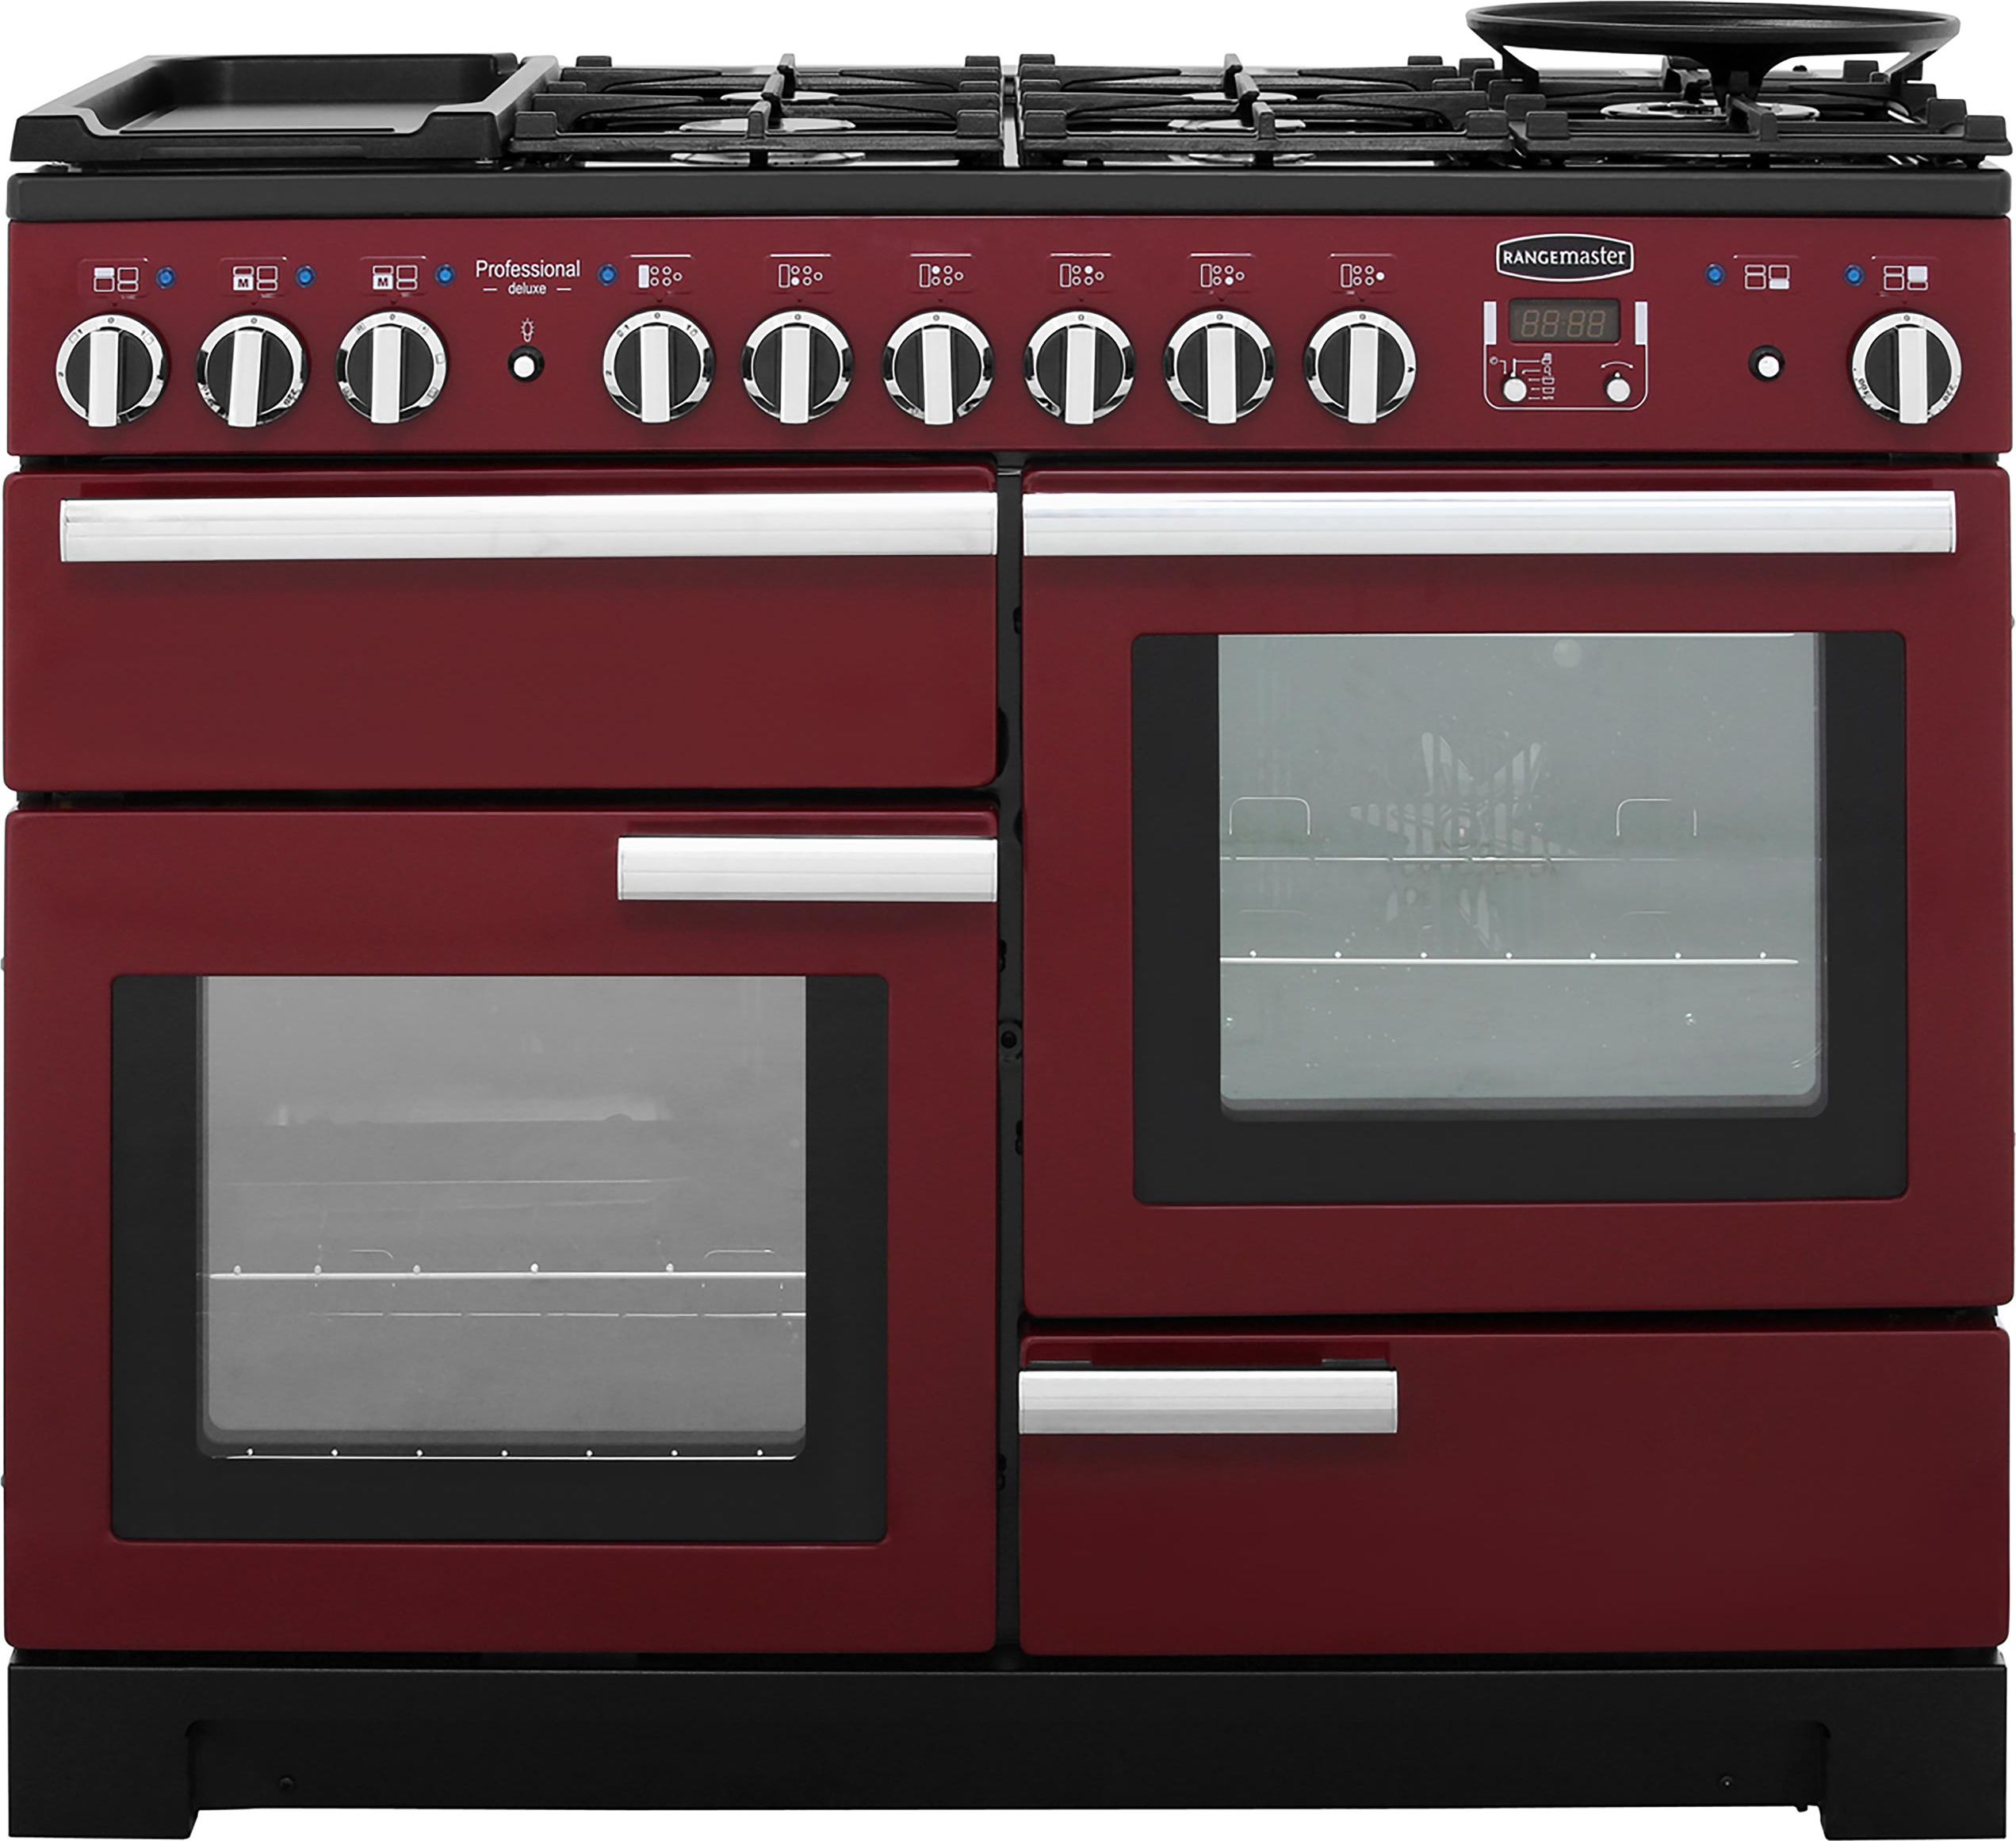 Rangemaster Professional Deluxe PDL110DFFCY/C 110cm Dual Fuel Range Cooker - Cranberry - A/A Rated, Red